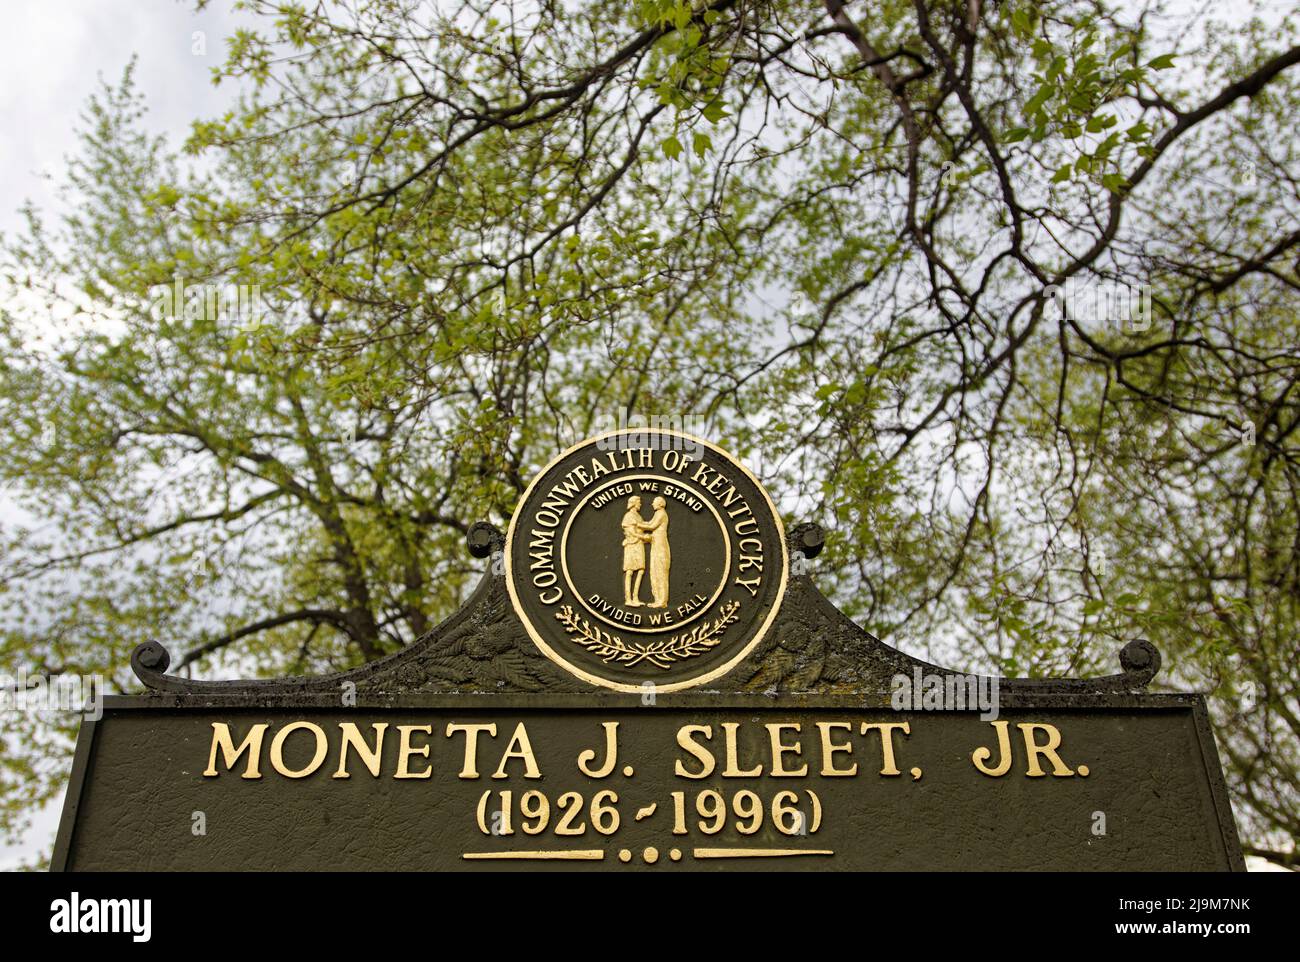 A Kentucky historical marker placed in 1999 commemorates the life and career of photojournalist Moneta J. Sleet Jr. in the newly-renamed Moneta Sleet Jr. Park on Sunday, April 24, 2022 in Owensboro, Daviess County, KY, USA. The city commission renamed Max Rhoads Park in honor of Sleet, an Owensboro native who grew up in the neighborhood near the park and went on to become the first Black named recipient of a Pulitzer Prize for journalism in 1969. (Apex MediaWire Photo by Billy Suratt) Stock Photo